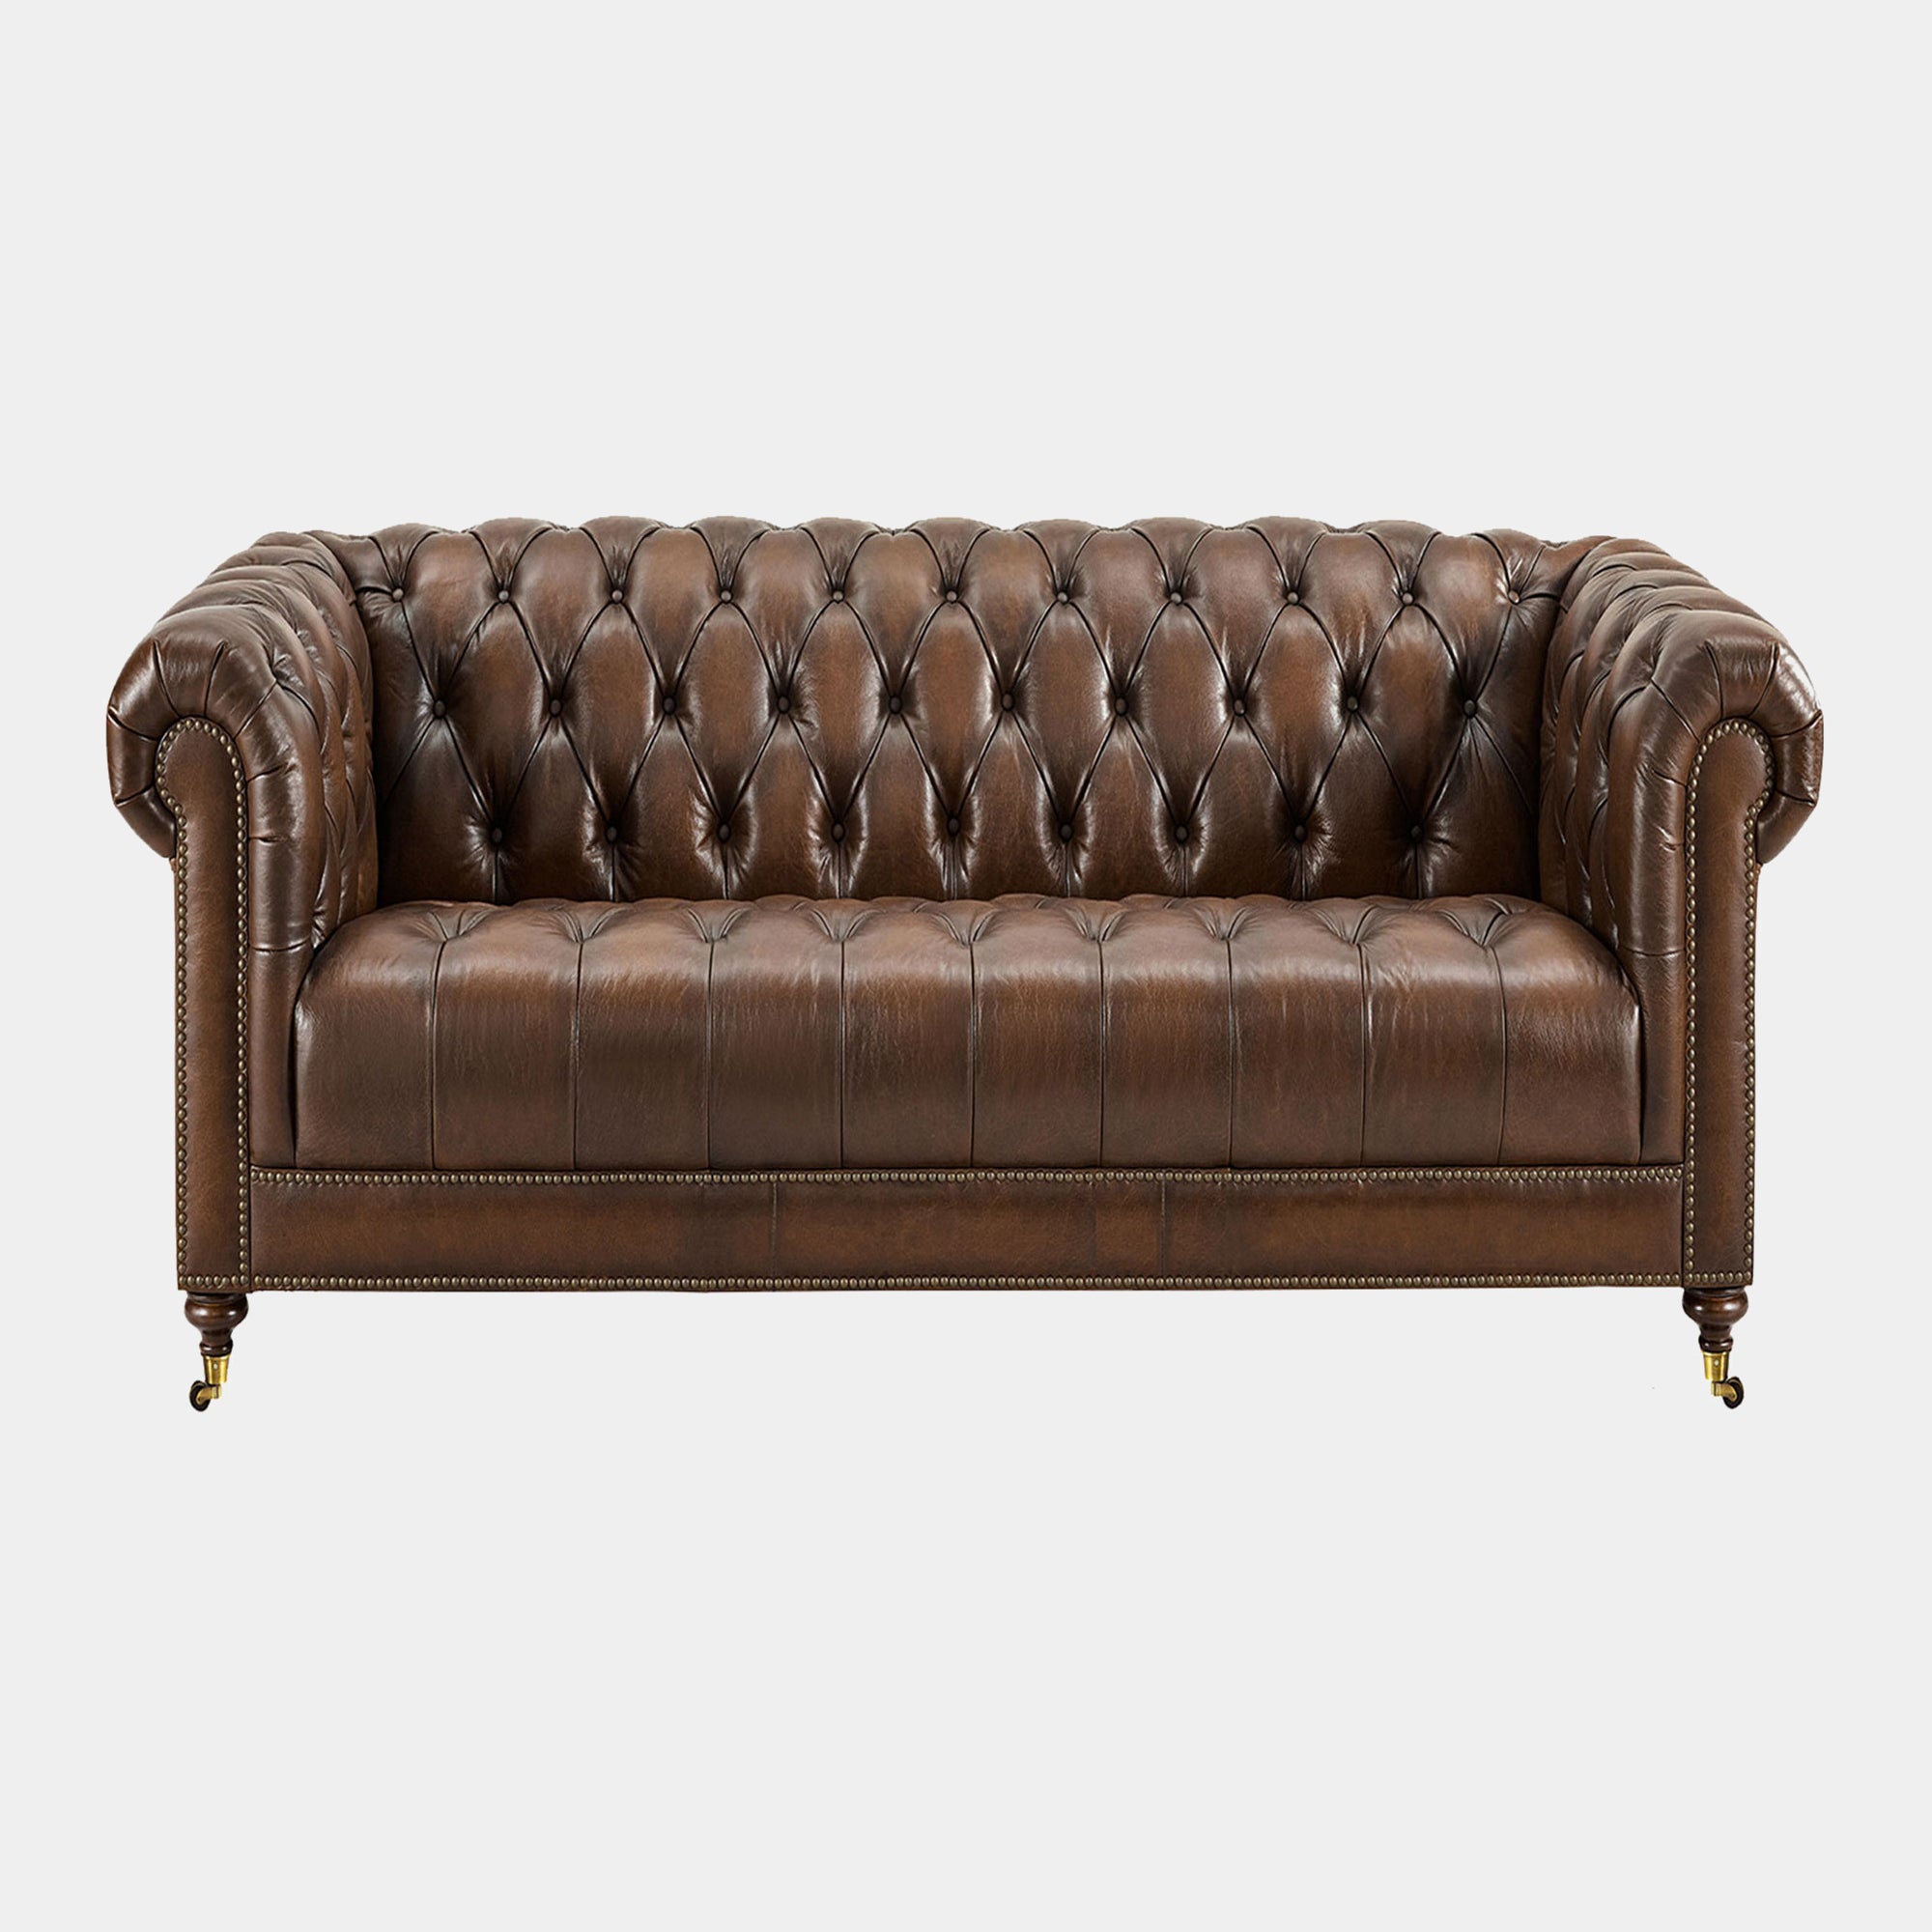 Churchill - 3 Seat Sofa In Leather Vintage LLS